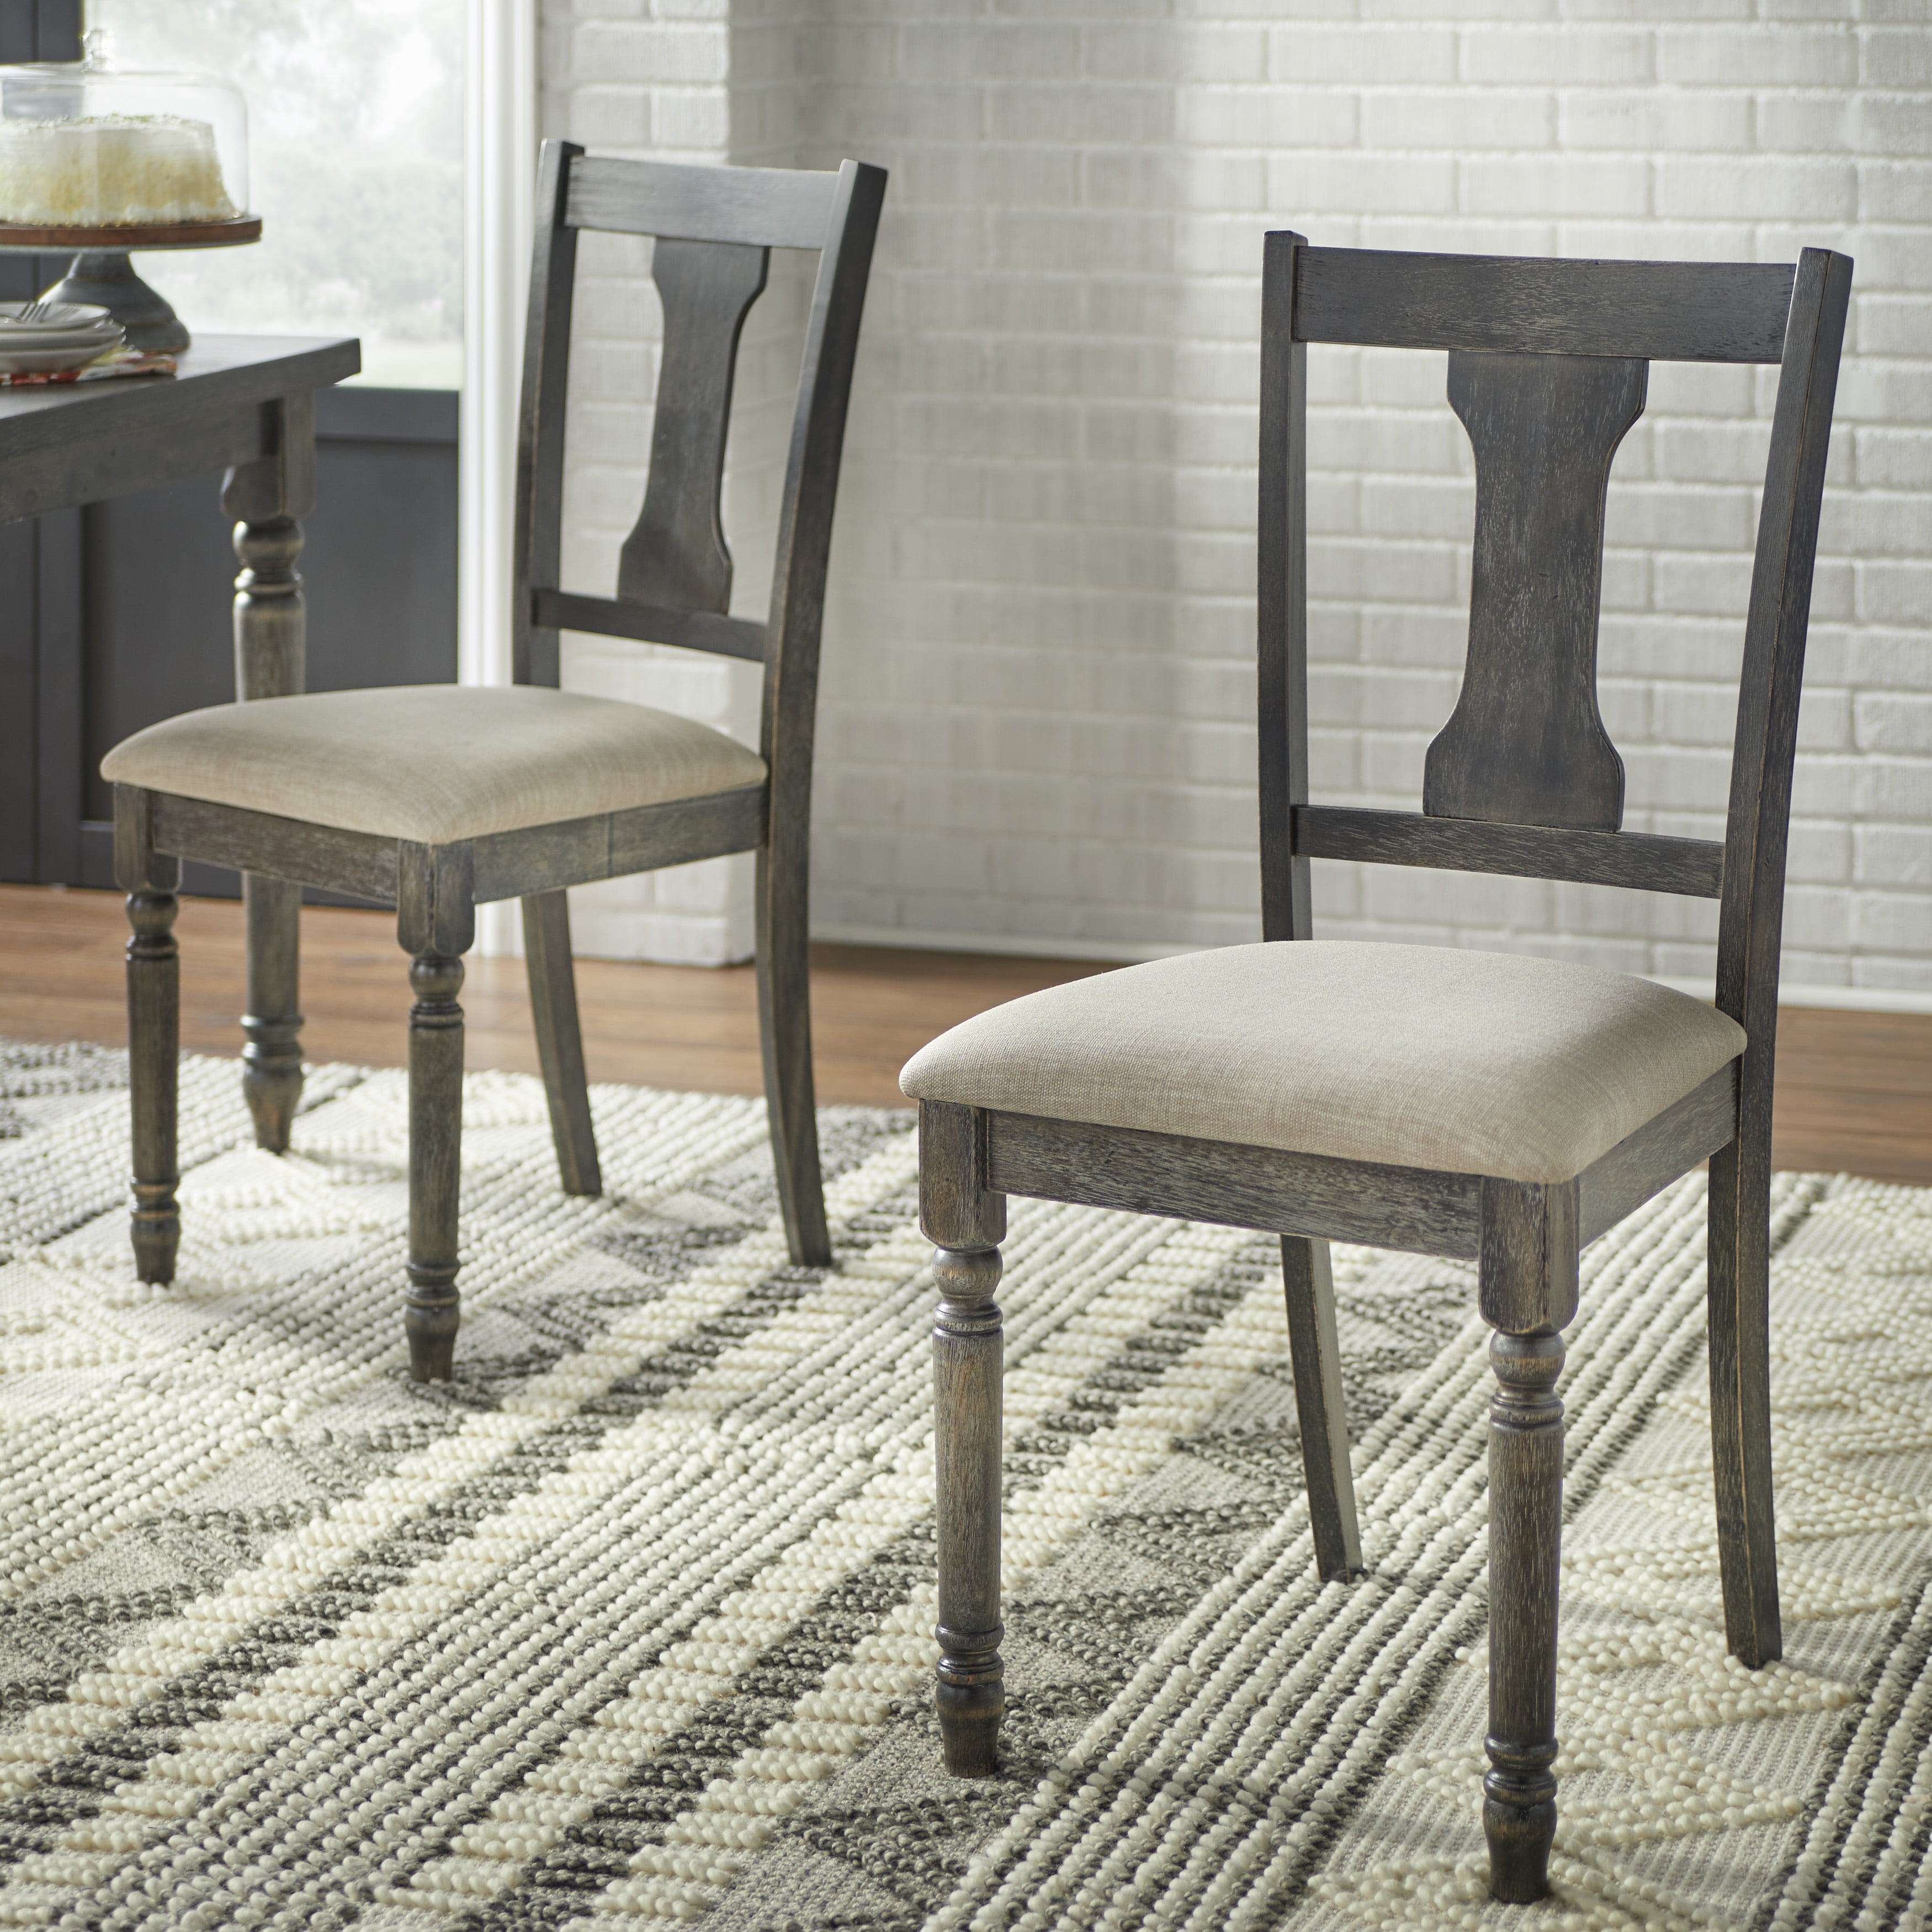 Burntwood Dining Chair Set Of 2, Grey Wash Wood Dining Chairs